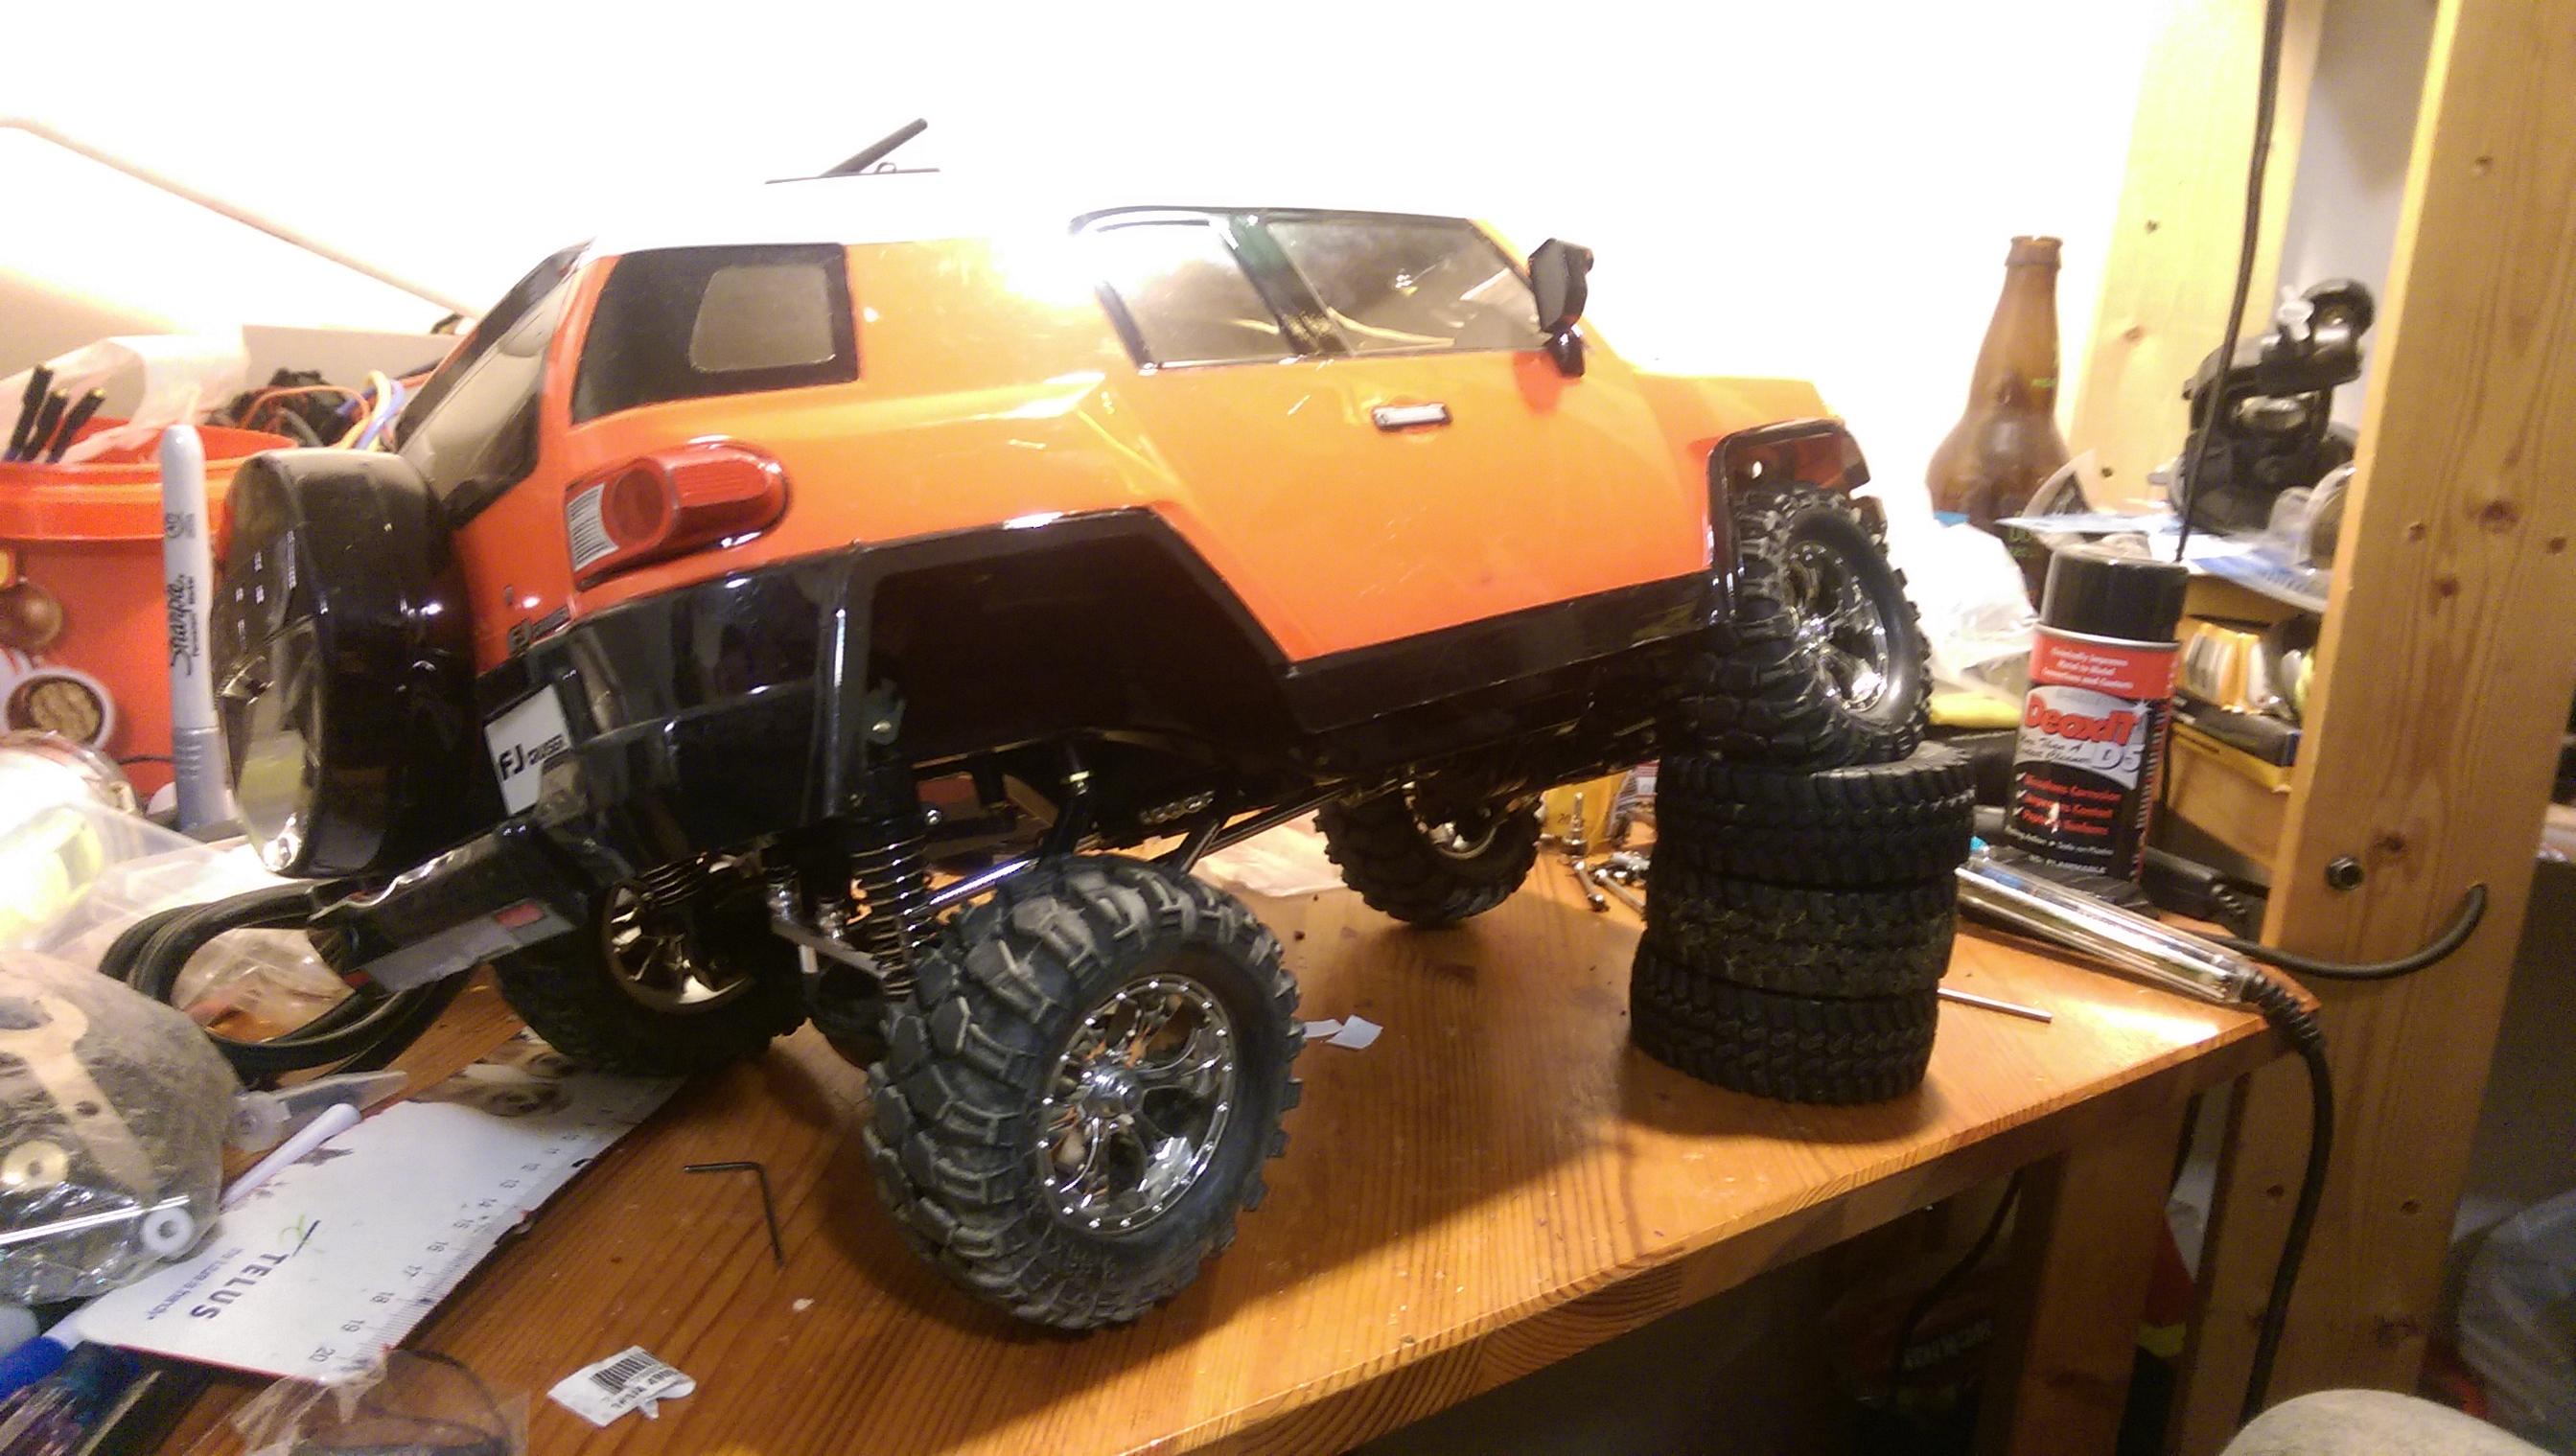 News The Hpi Venture Has Finally Arrived Rc Groups